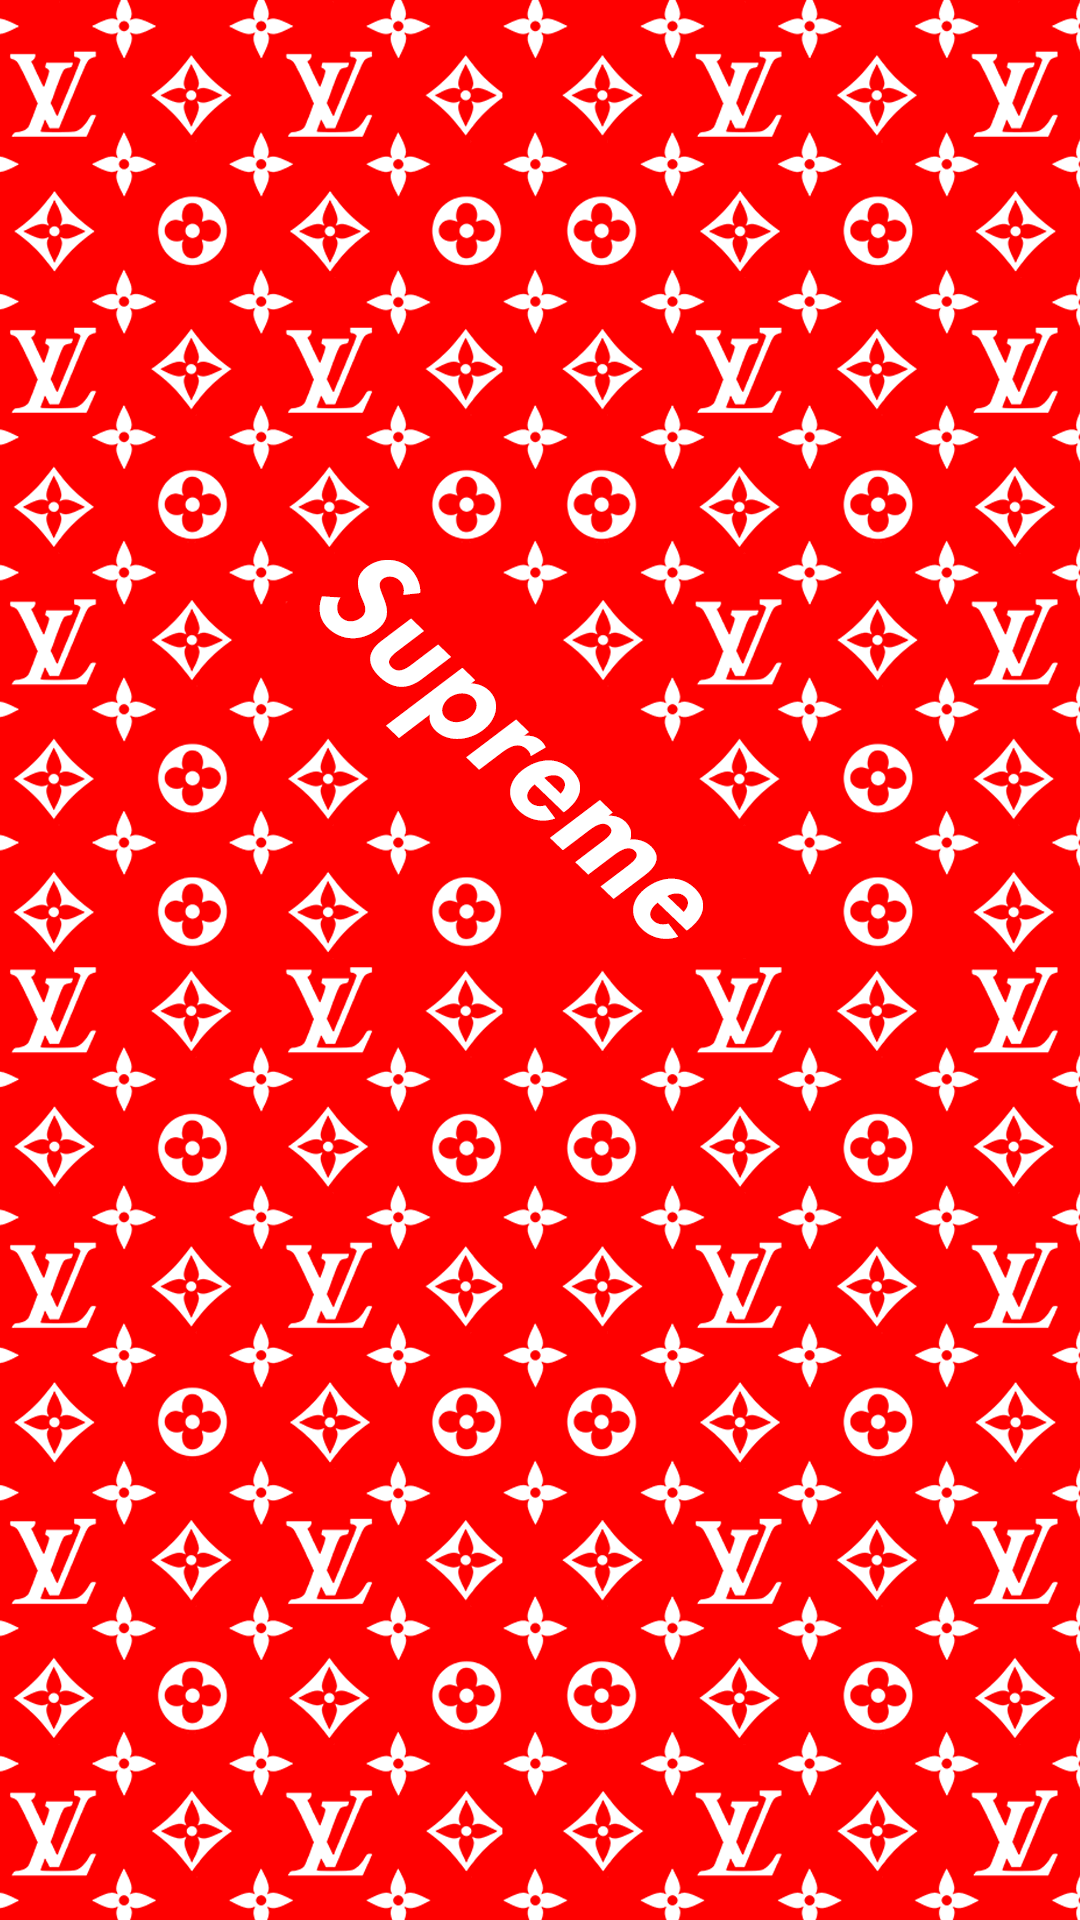 Free download 70 Supreme Wallpapers in 4K AllHDWallpapers [1080x1920 ...